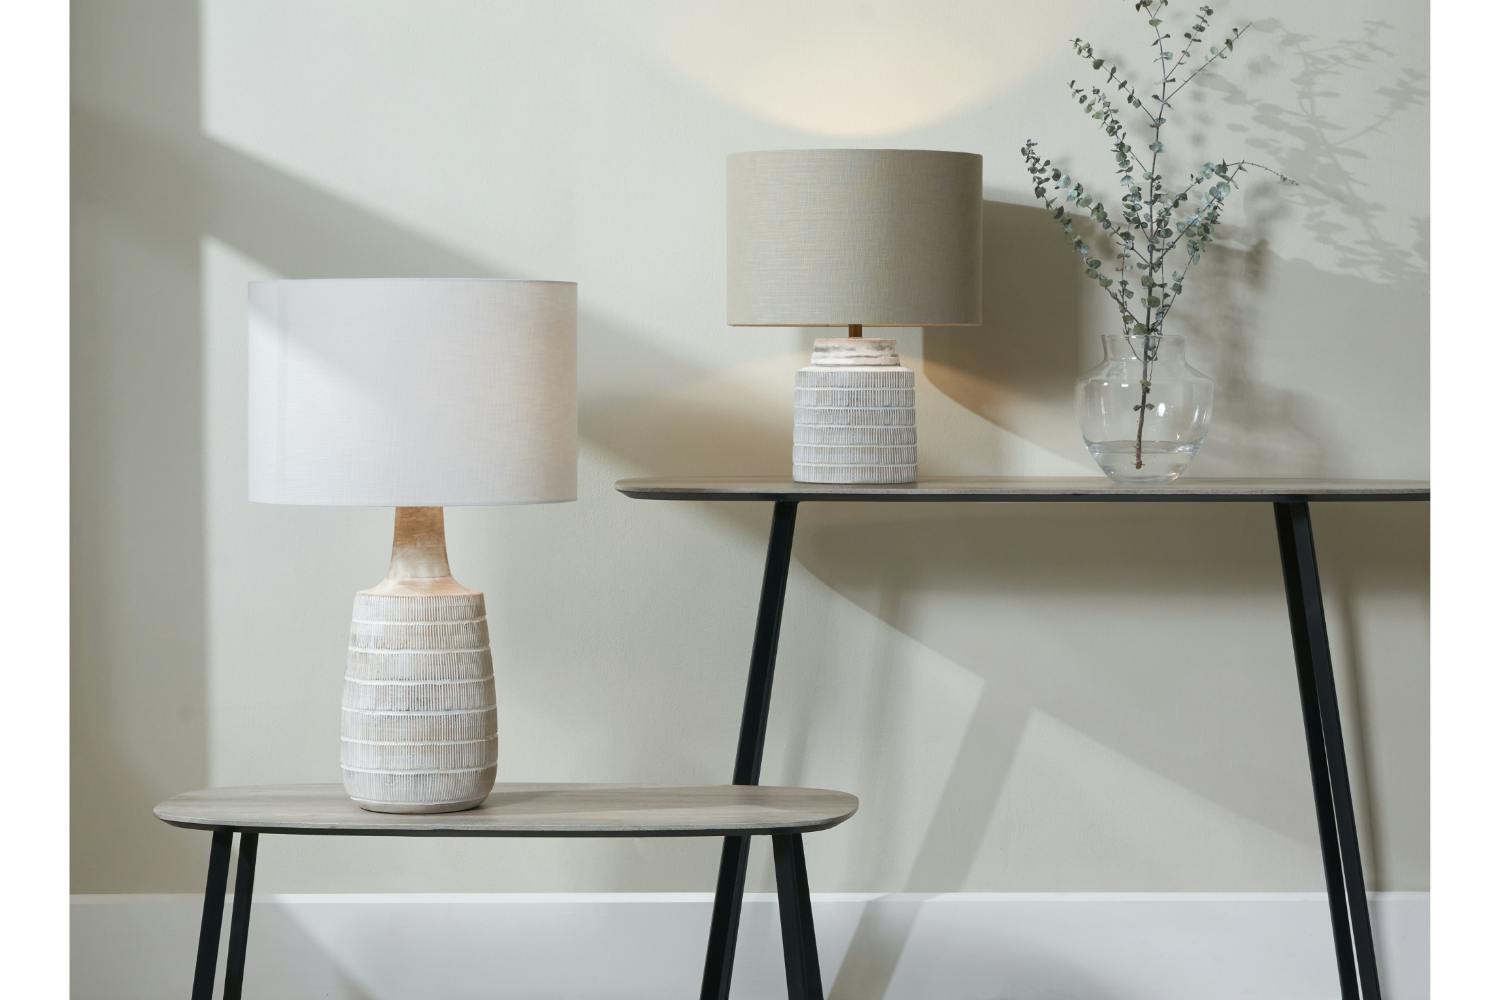 Table Lamp | White Wash